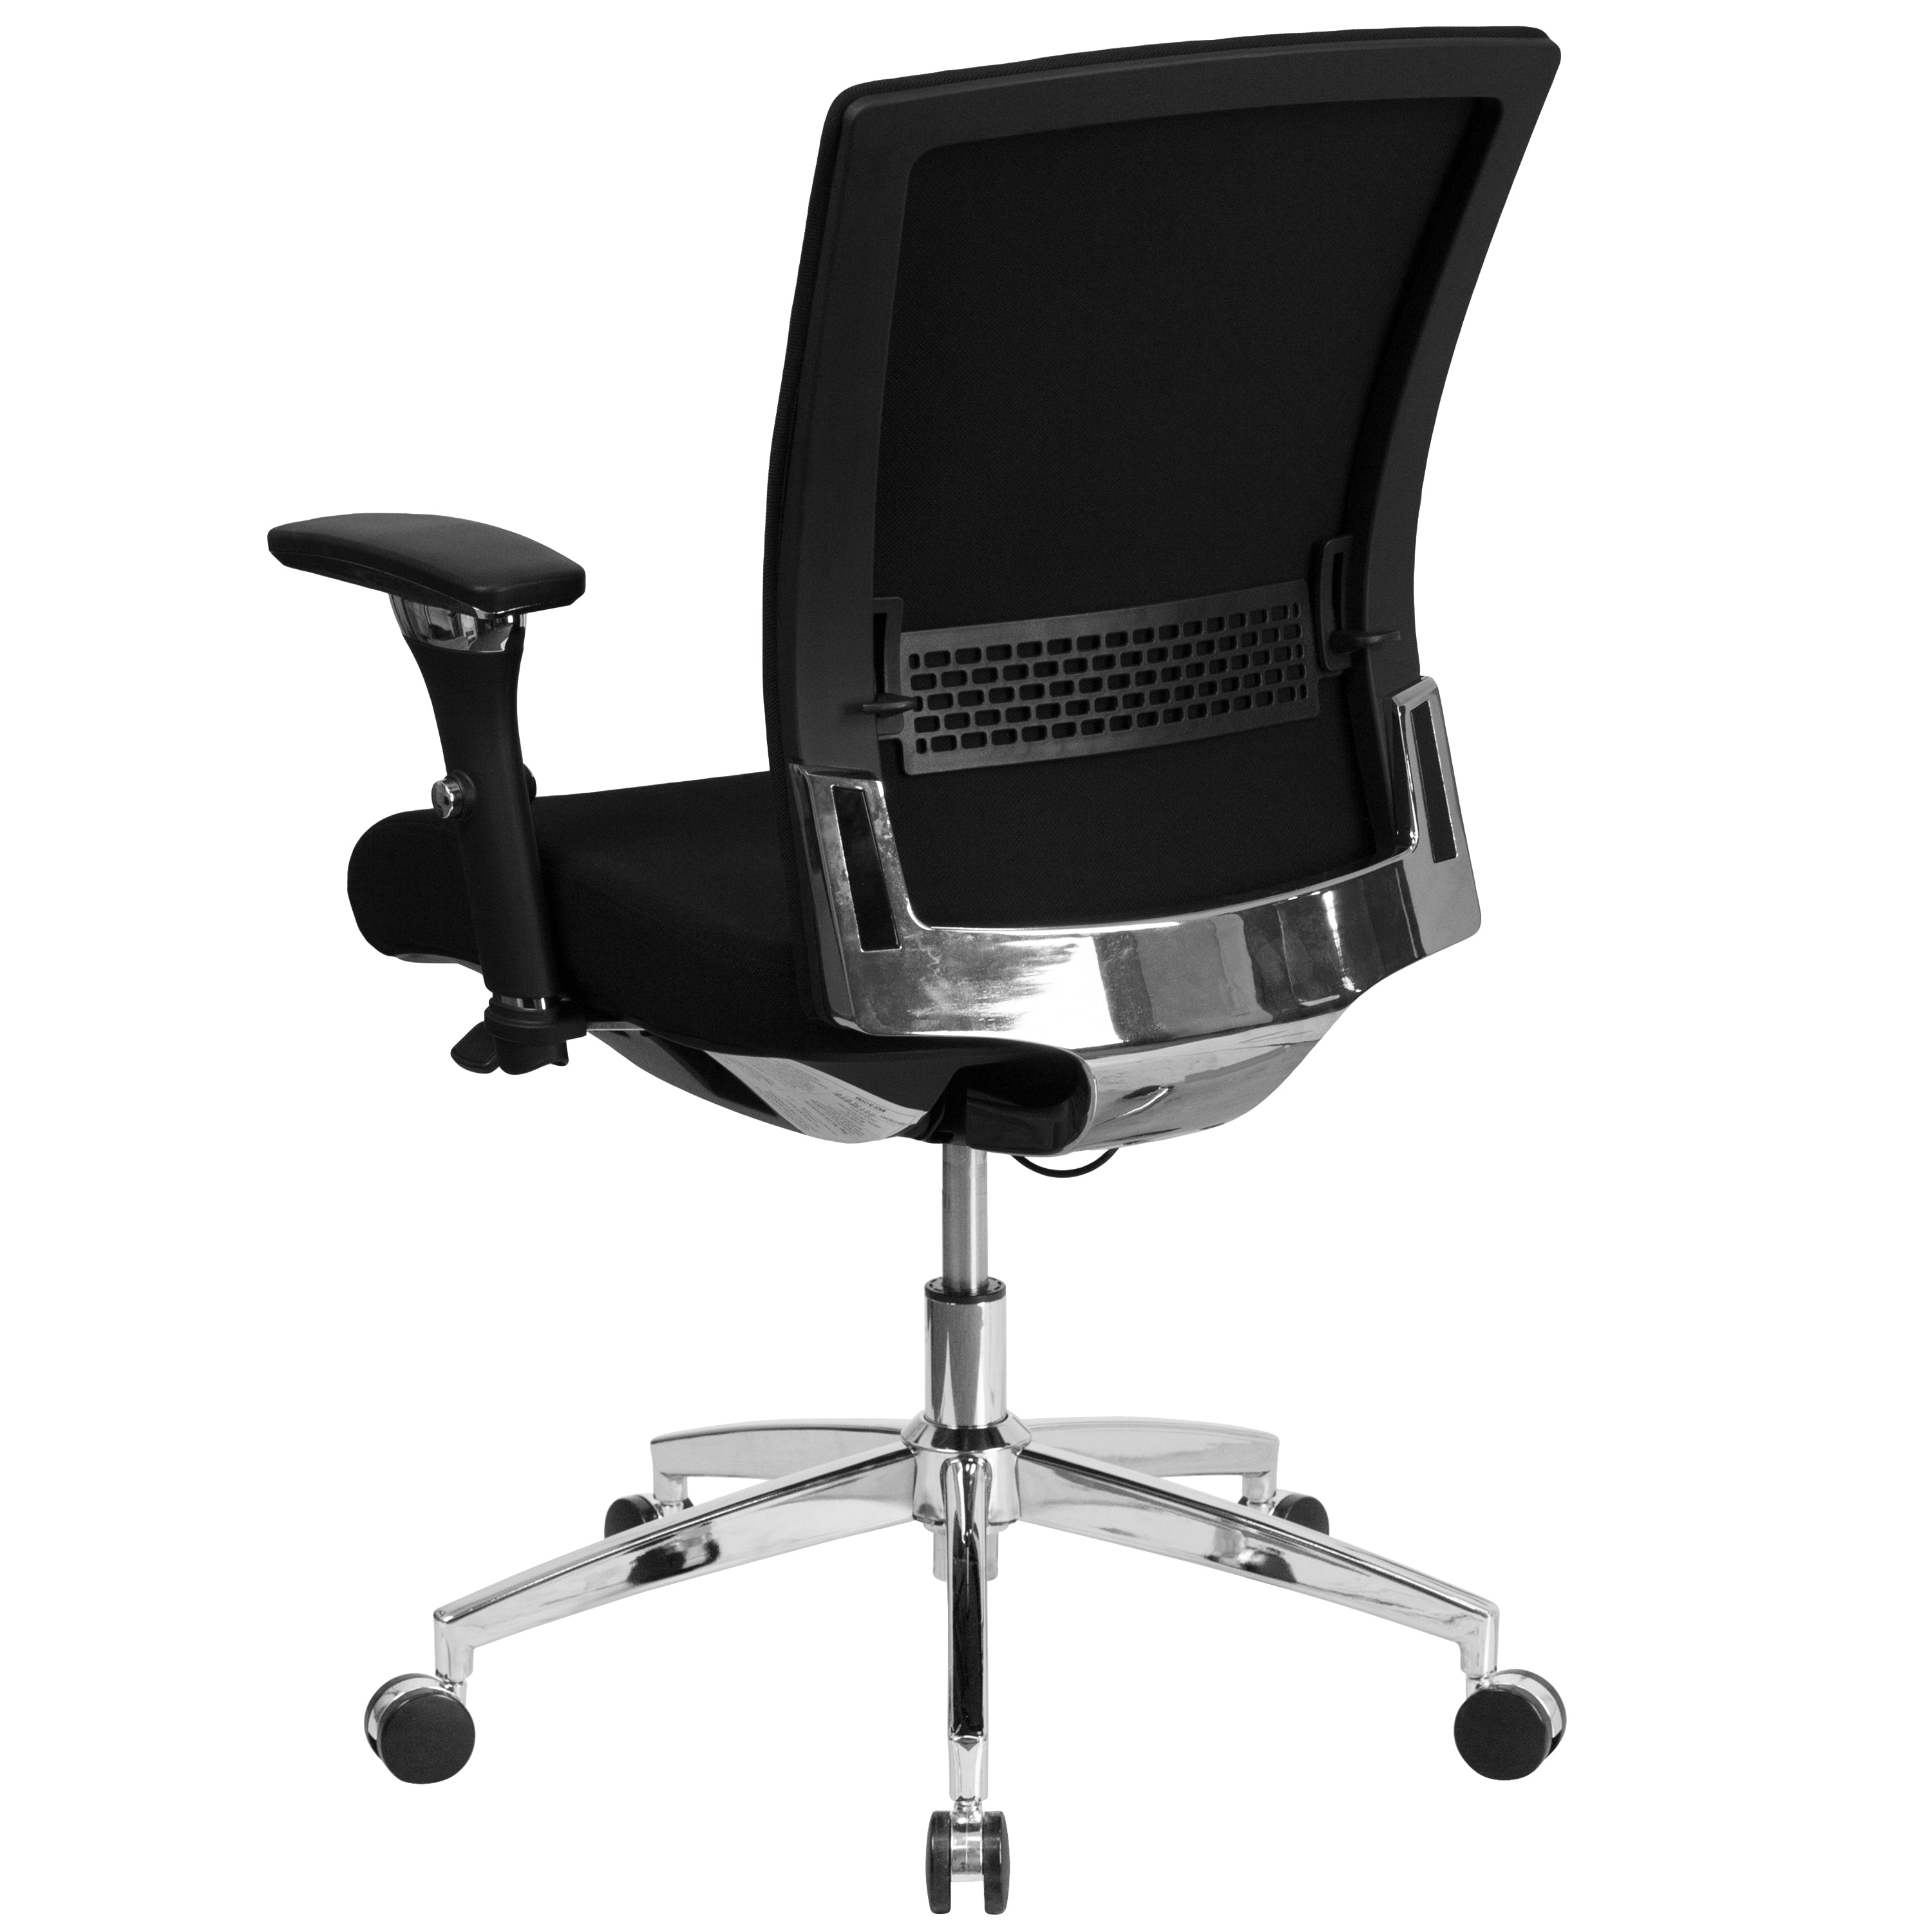 HERCULES Series 24/7 Intensive Use 300 lb. Rated Multifunction Executive Swivel Ergonomic Office Chair with Seat Slider and Adjustable Lumbar-Office Chair-Flash Furniture-Wall2Wall Furnishings